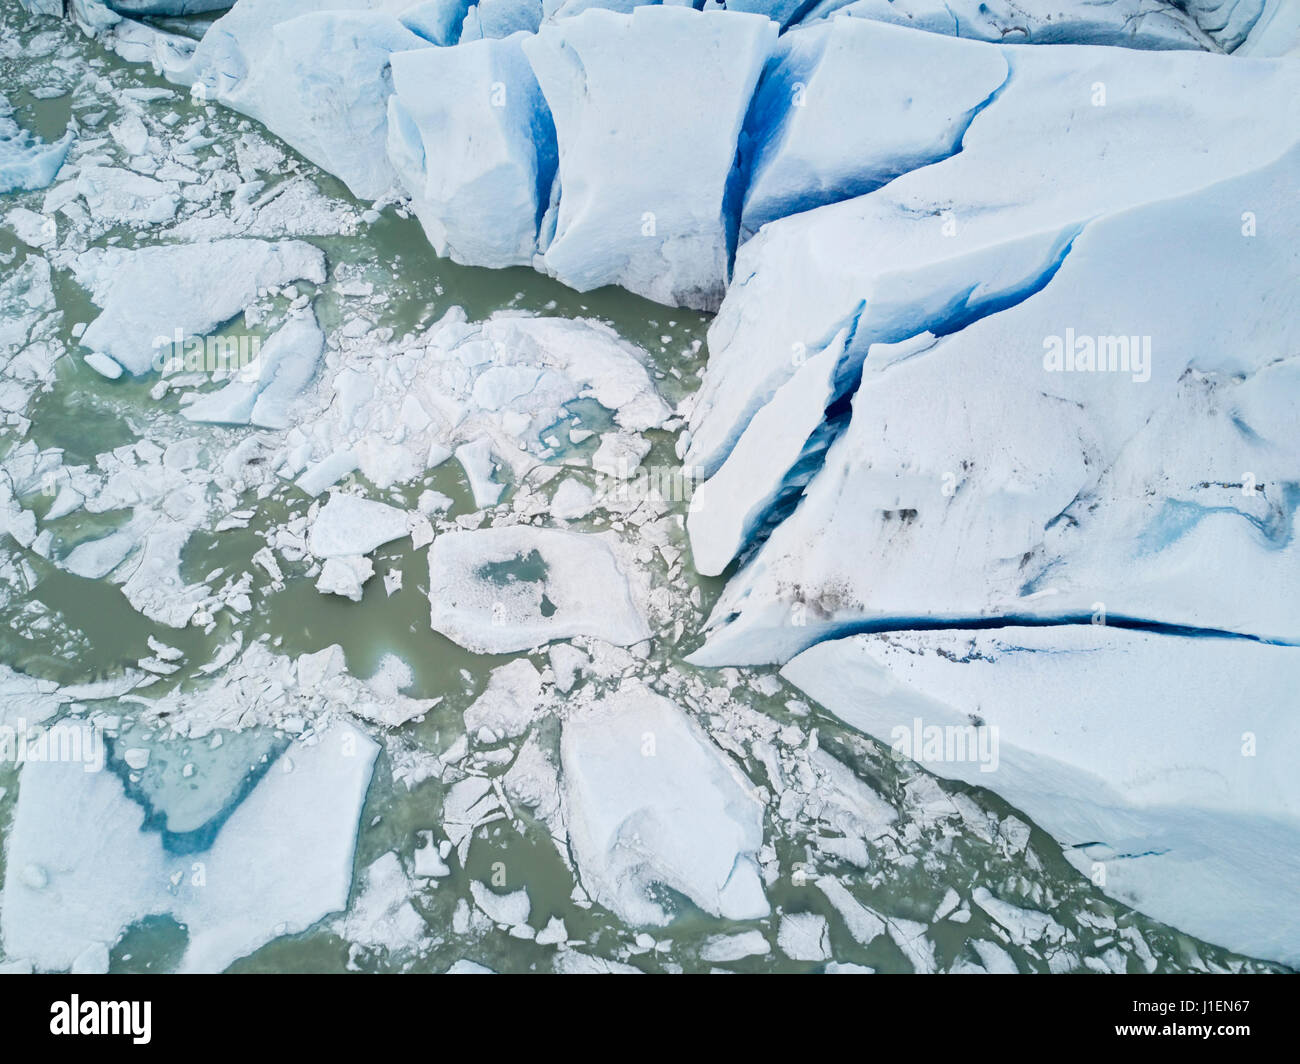 The Mendenhall glacier in Southeast Alaska as seen from above melting into the lake. Stock Photo